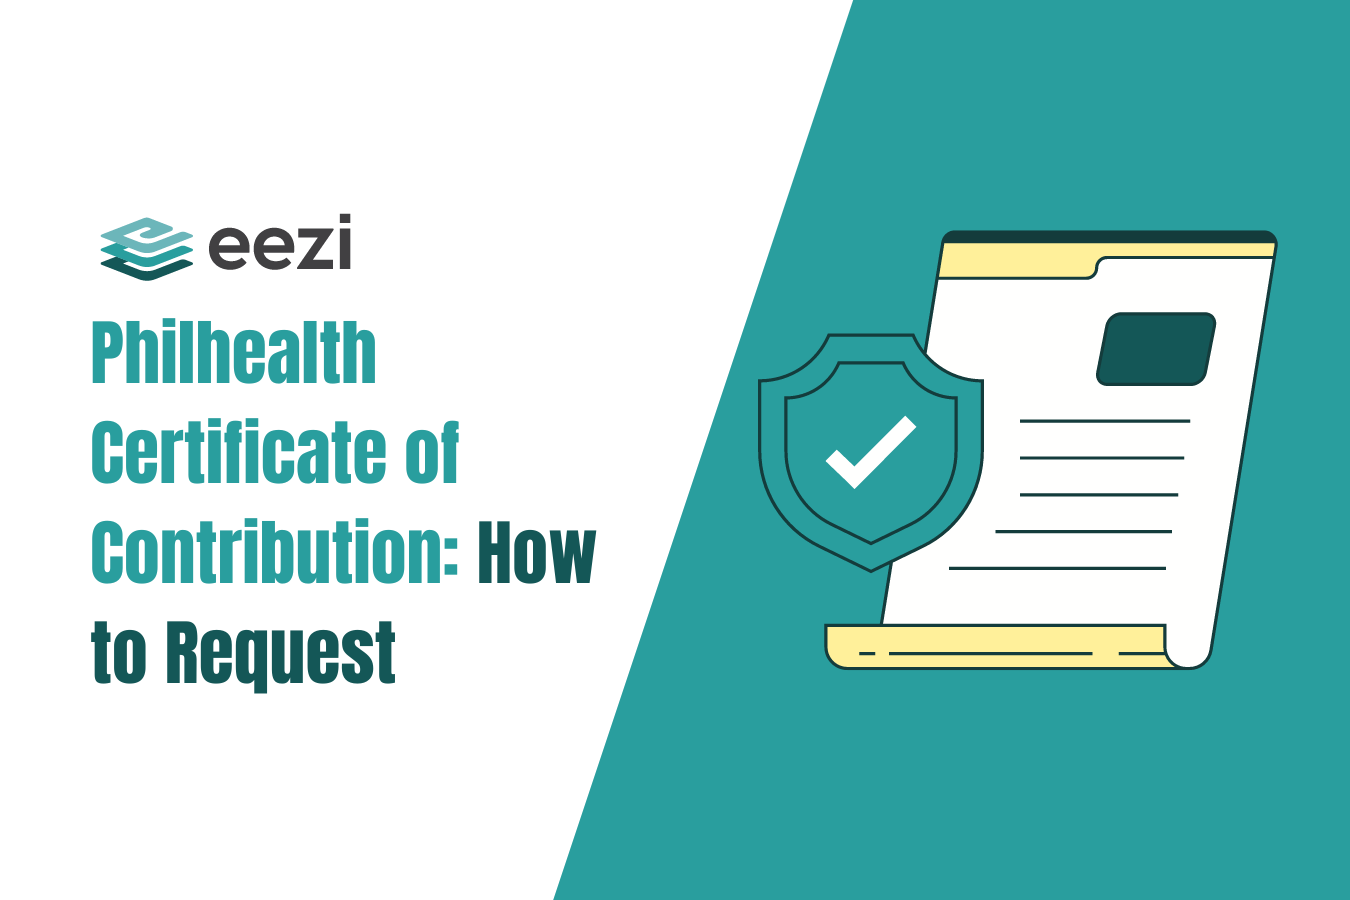 Philhealth Certificate of Contribution: How to Request